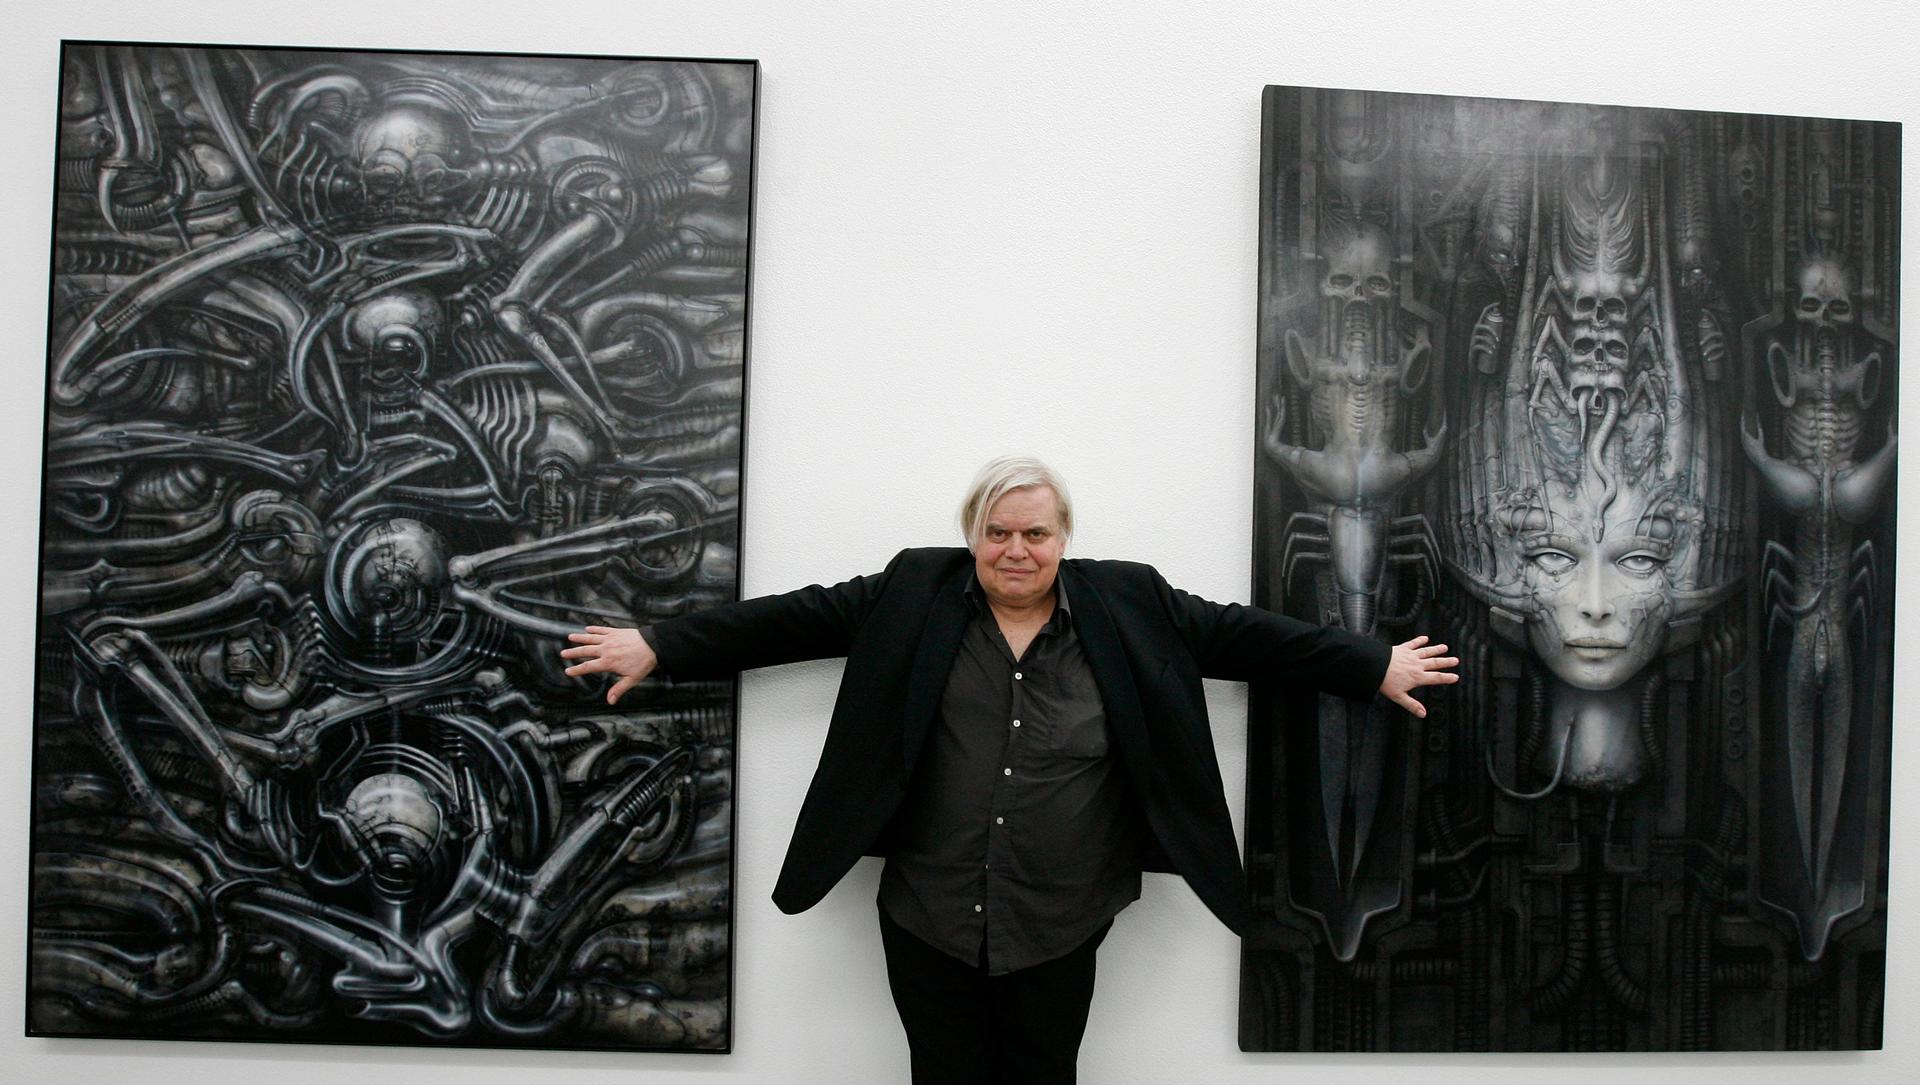 HR Giger poses with two of his works at his museum in Chur, Switzerland. Photograph: Arno Balzarini/AP